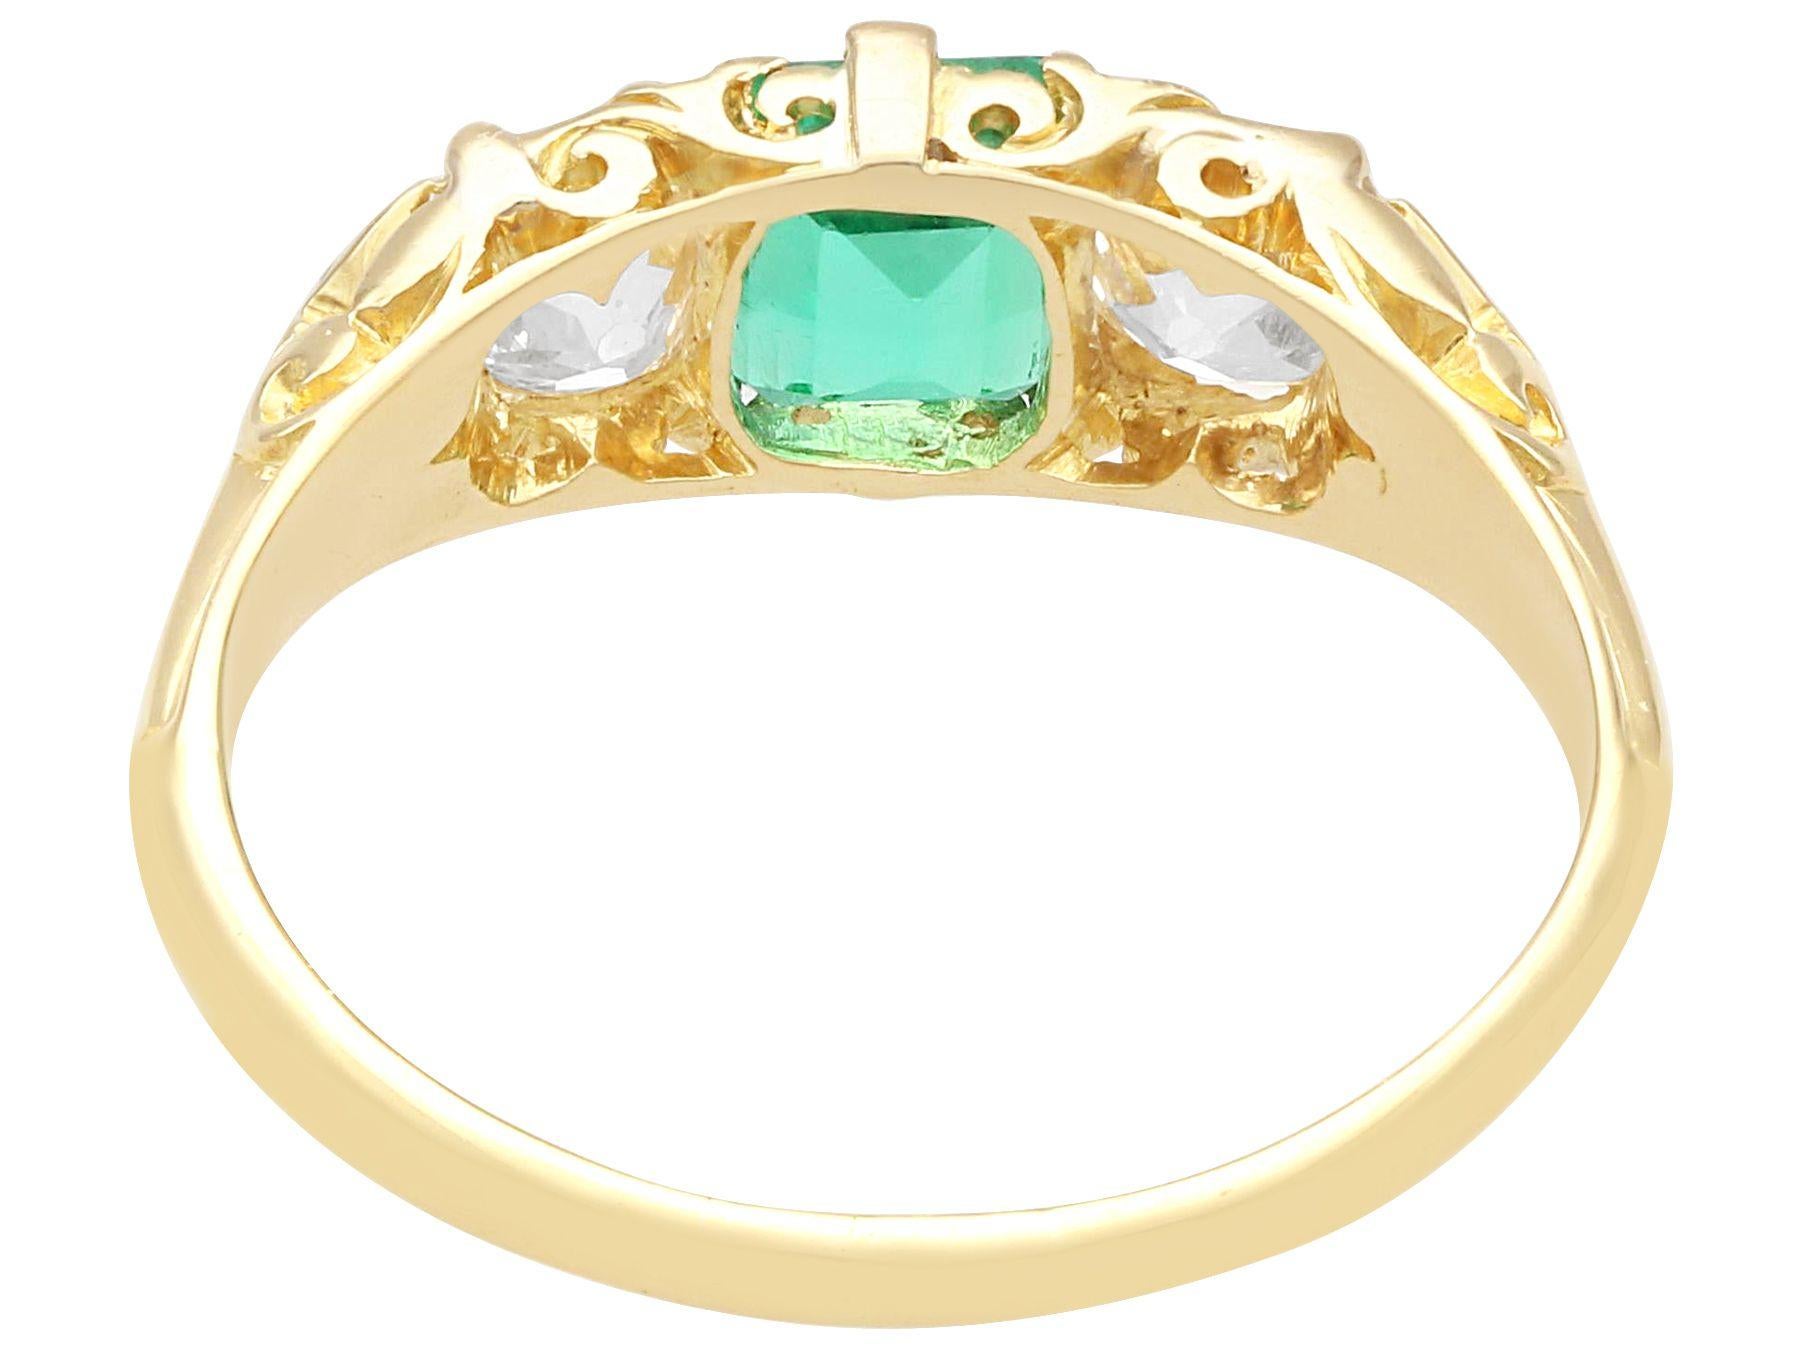 Antique 0.64ct Emerald 0.79ct Diamond 18k Yellow Gold Trilogy Ring, circa 1920 In Excellent Condition For Sale In Jesmond, Newcastle Upon Tyne